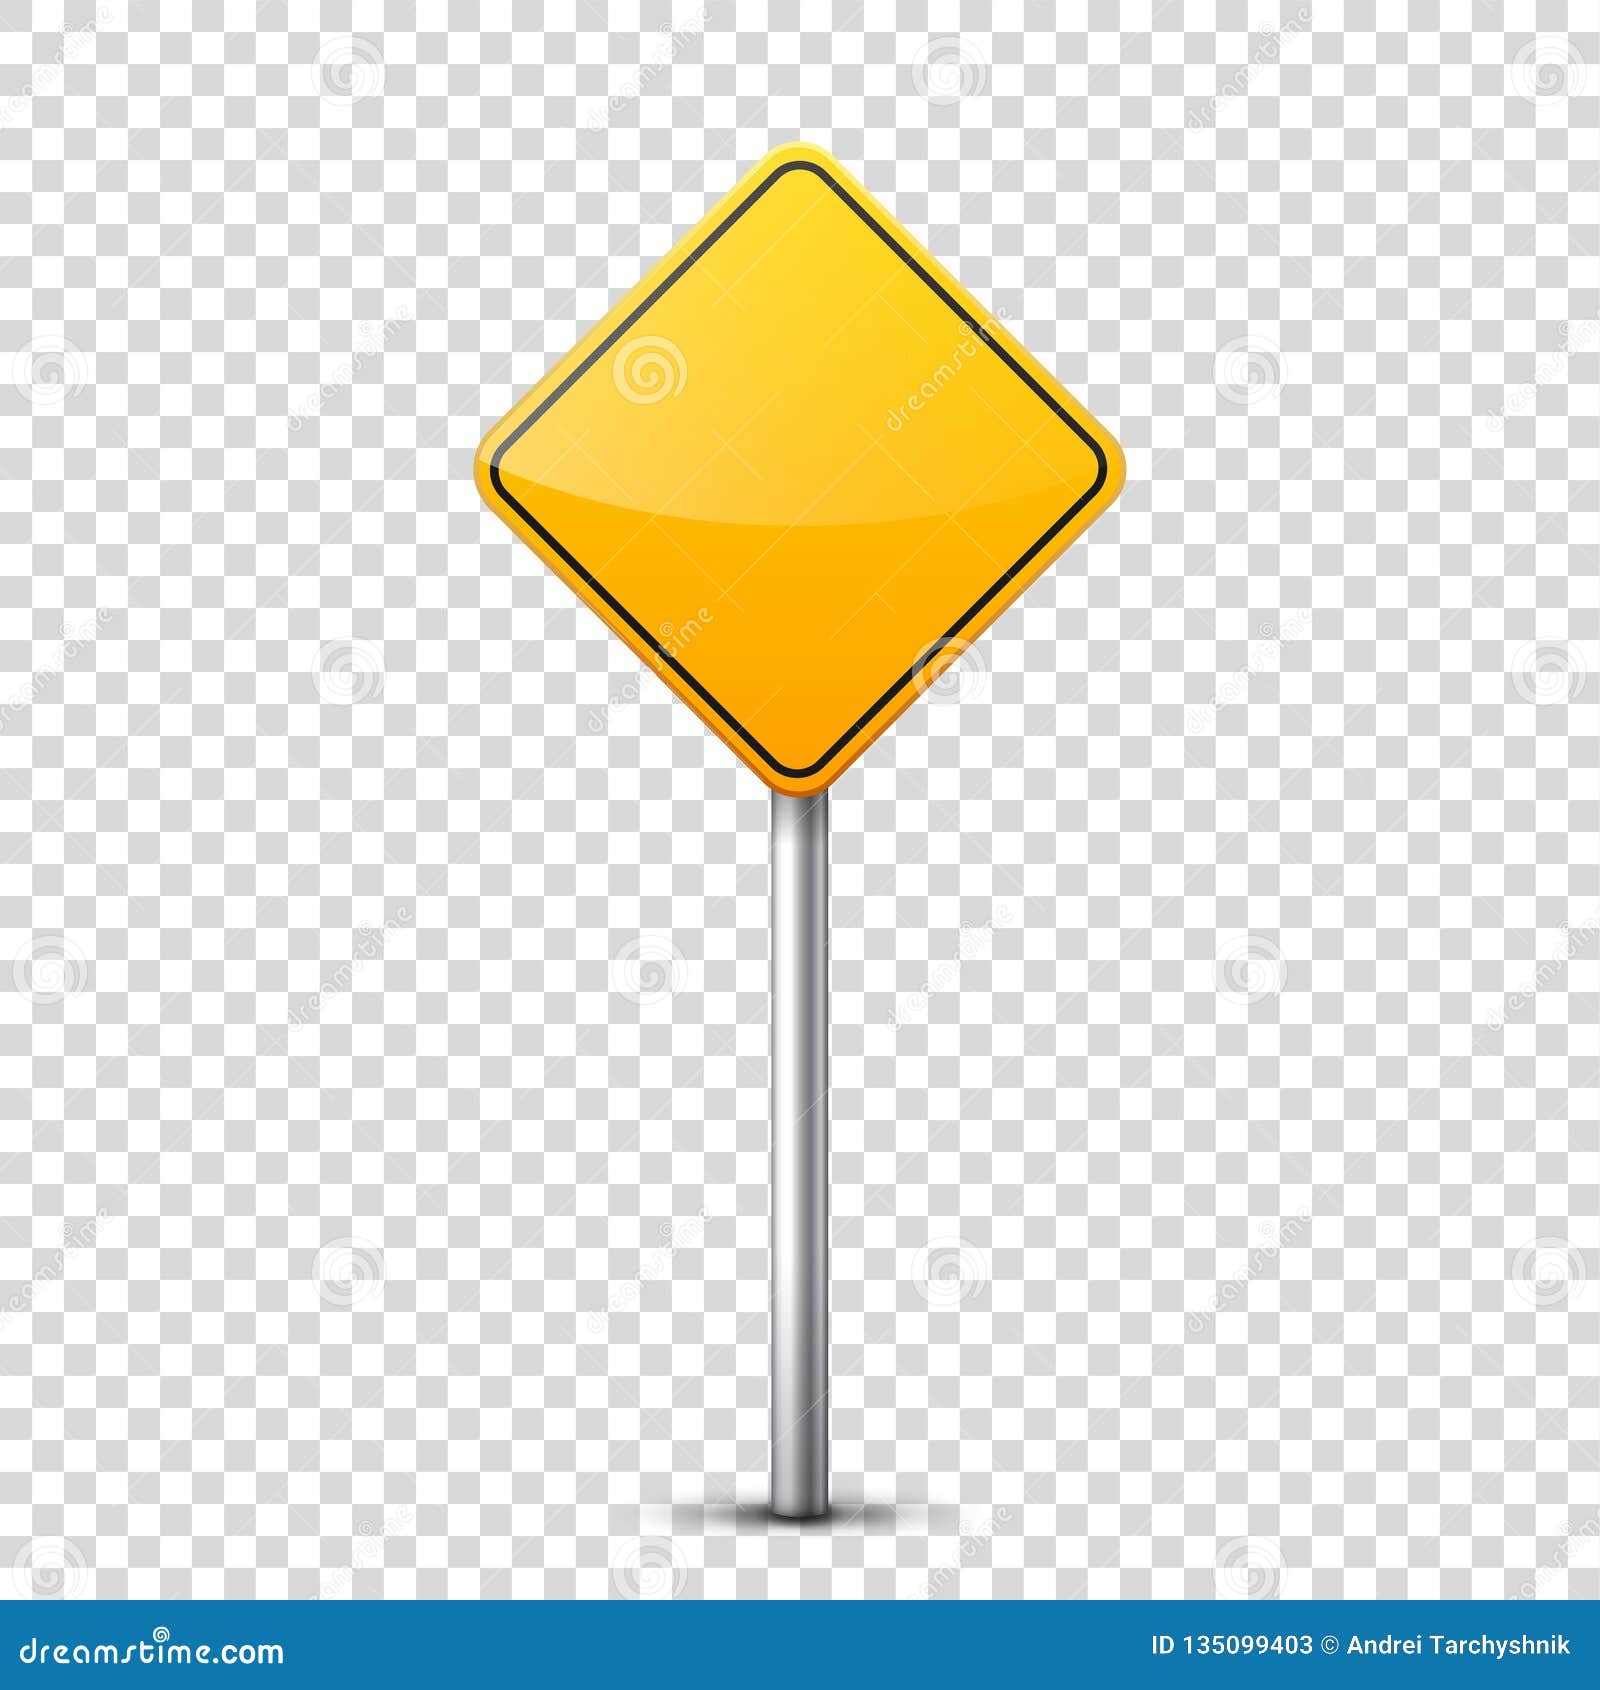 Road Yellow Signs Collection Isolated On Transparent Background Road Traffic Control Lane Usage Stop And Yield Stock Vector Illustration Of Post Pointer